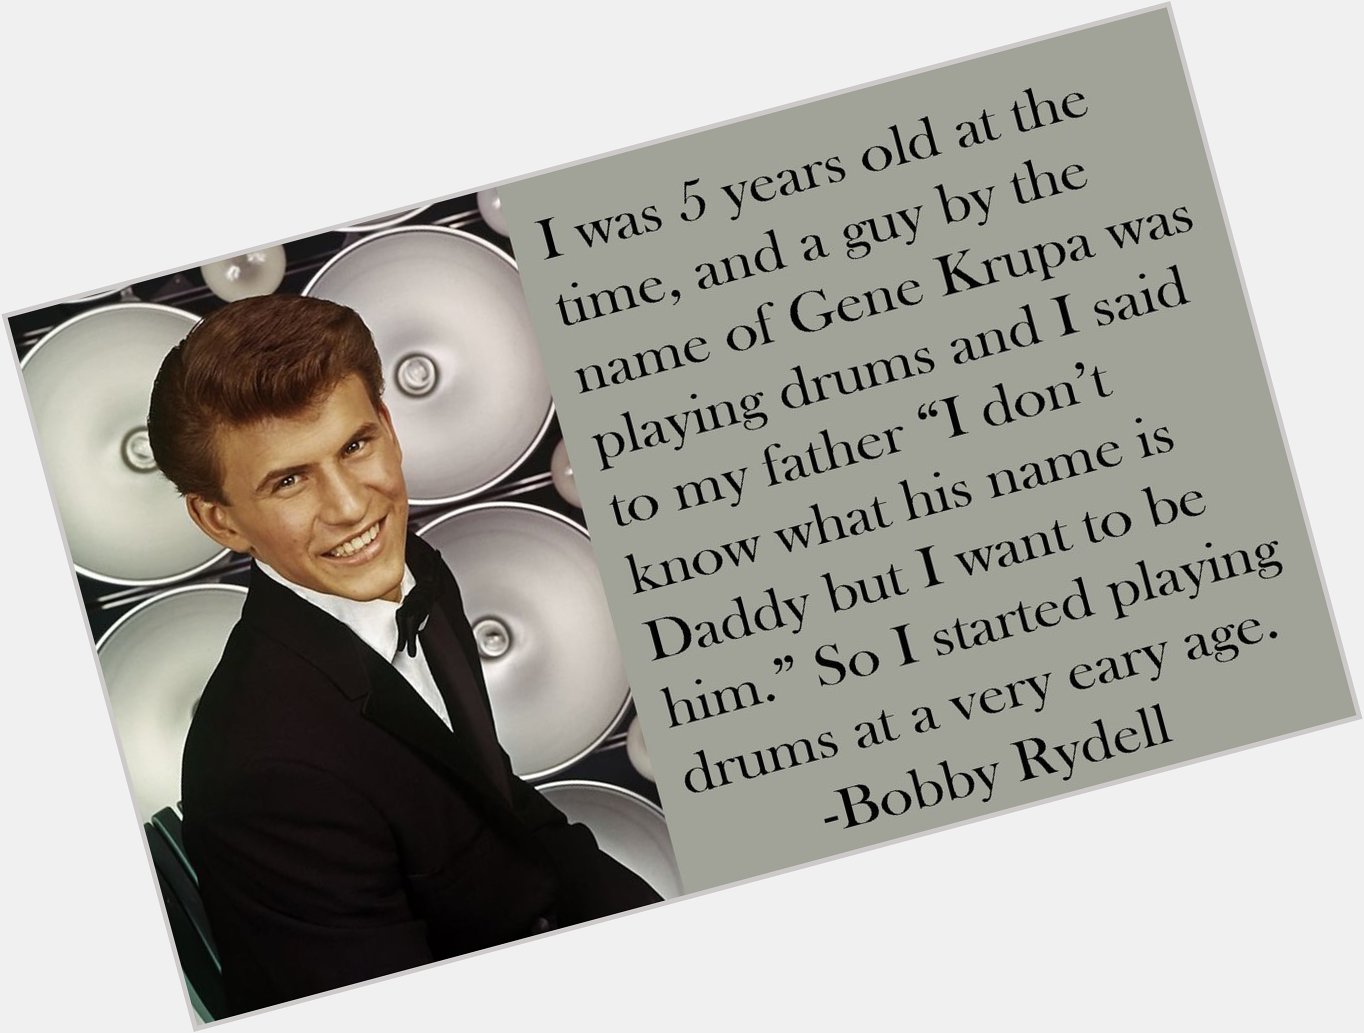 Happy 79th Birthday to Bobby Rydell [Ridarelli], who was born in Philadelphia, Pennsylvania on this day in 1942. 